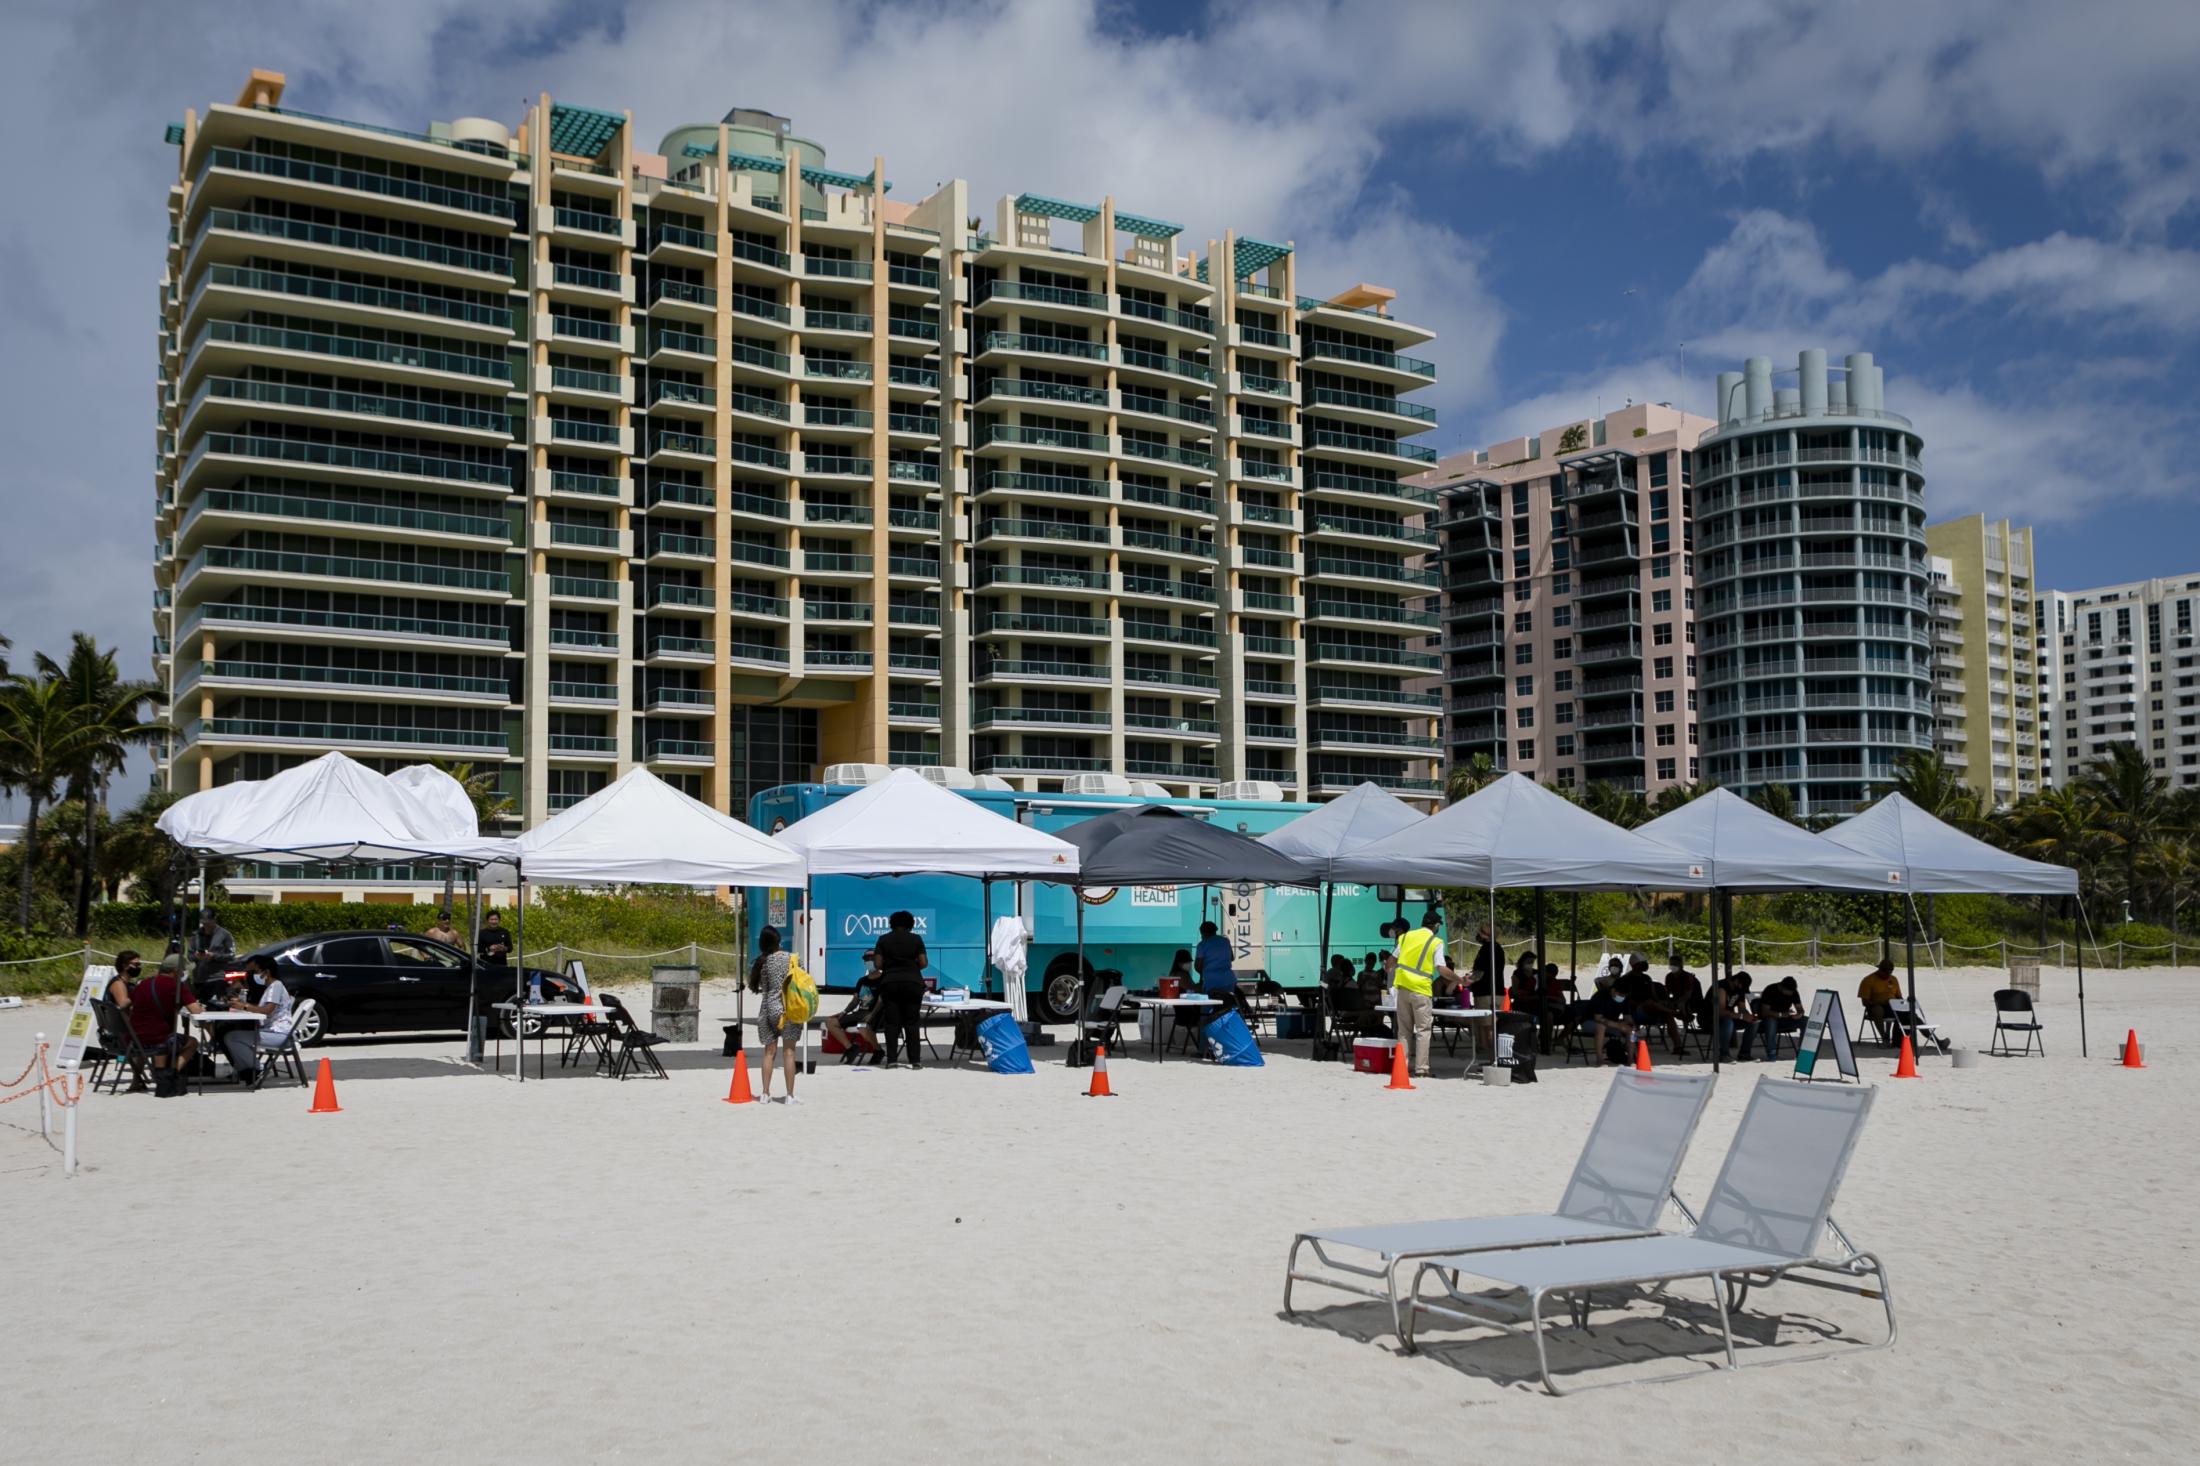 Tourists get Johnson & Johnson COVID-19 vaccine at Miami Beach - A pop-up vaccination center is seen at the beach, in...